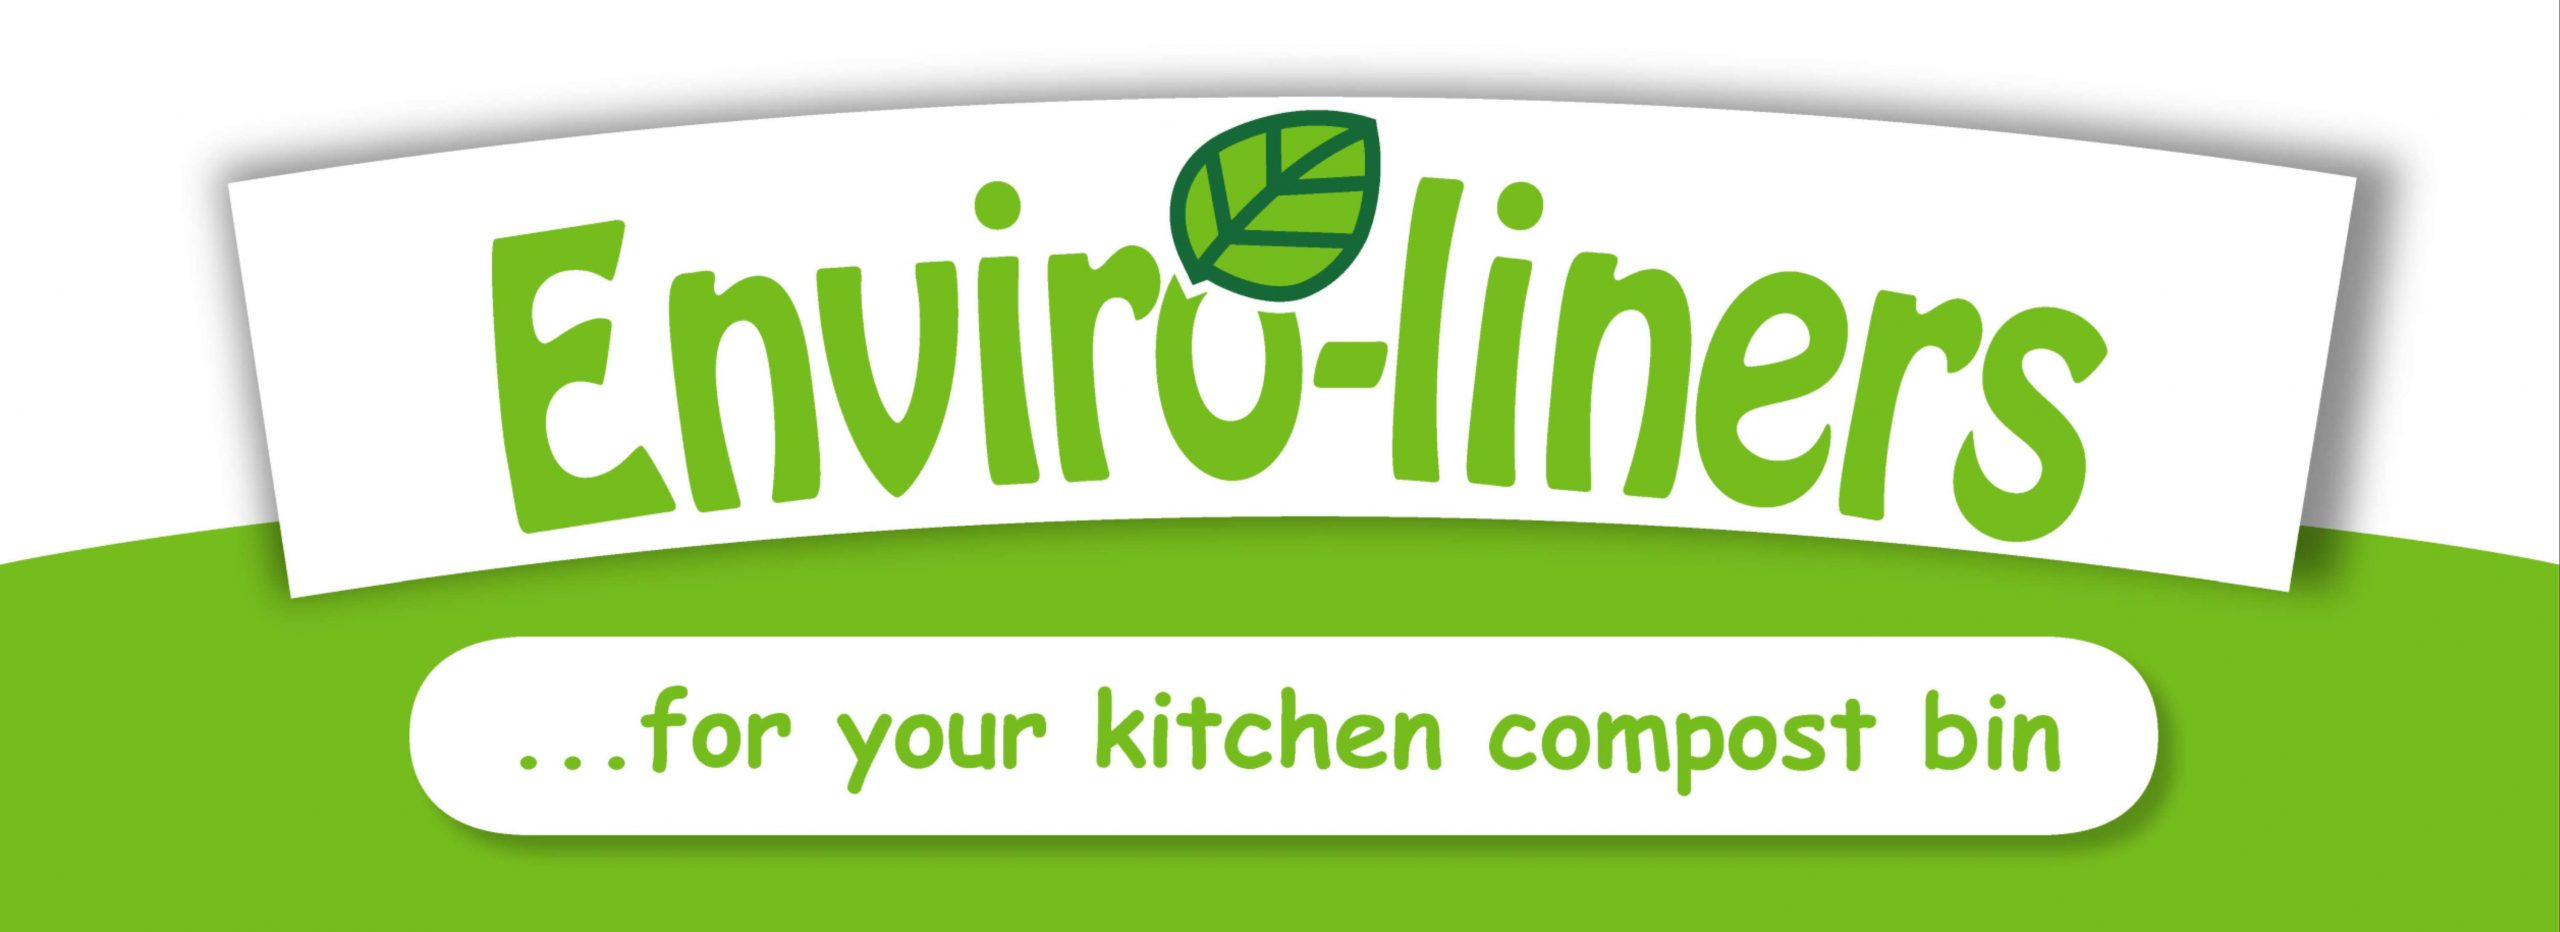 Enviro-liners ... for your kitchen compost bin - MCompany